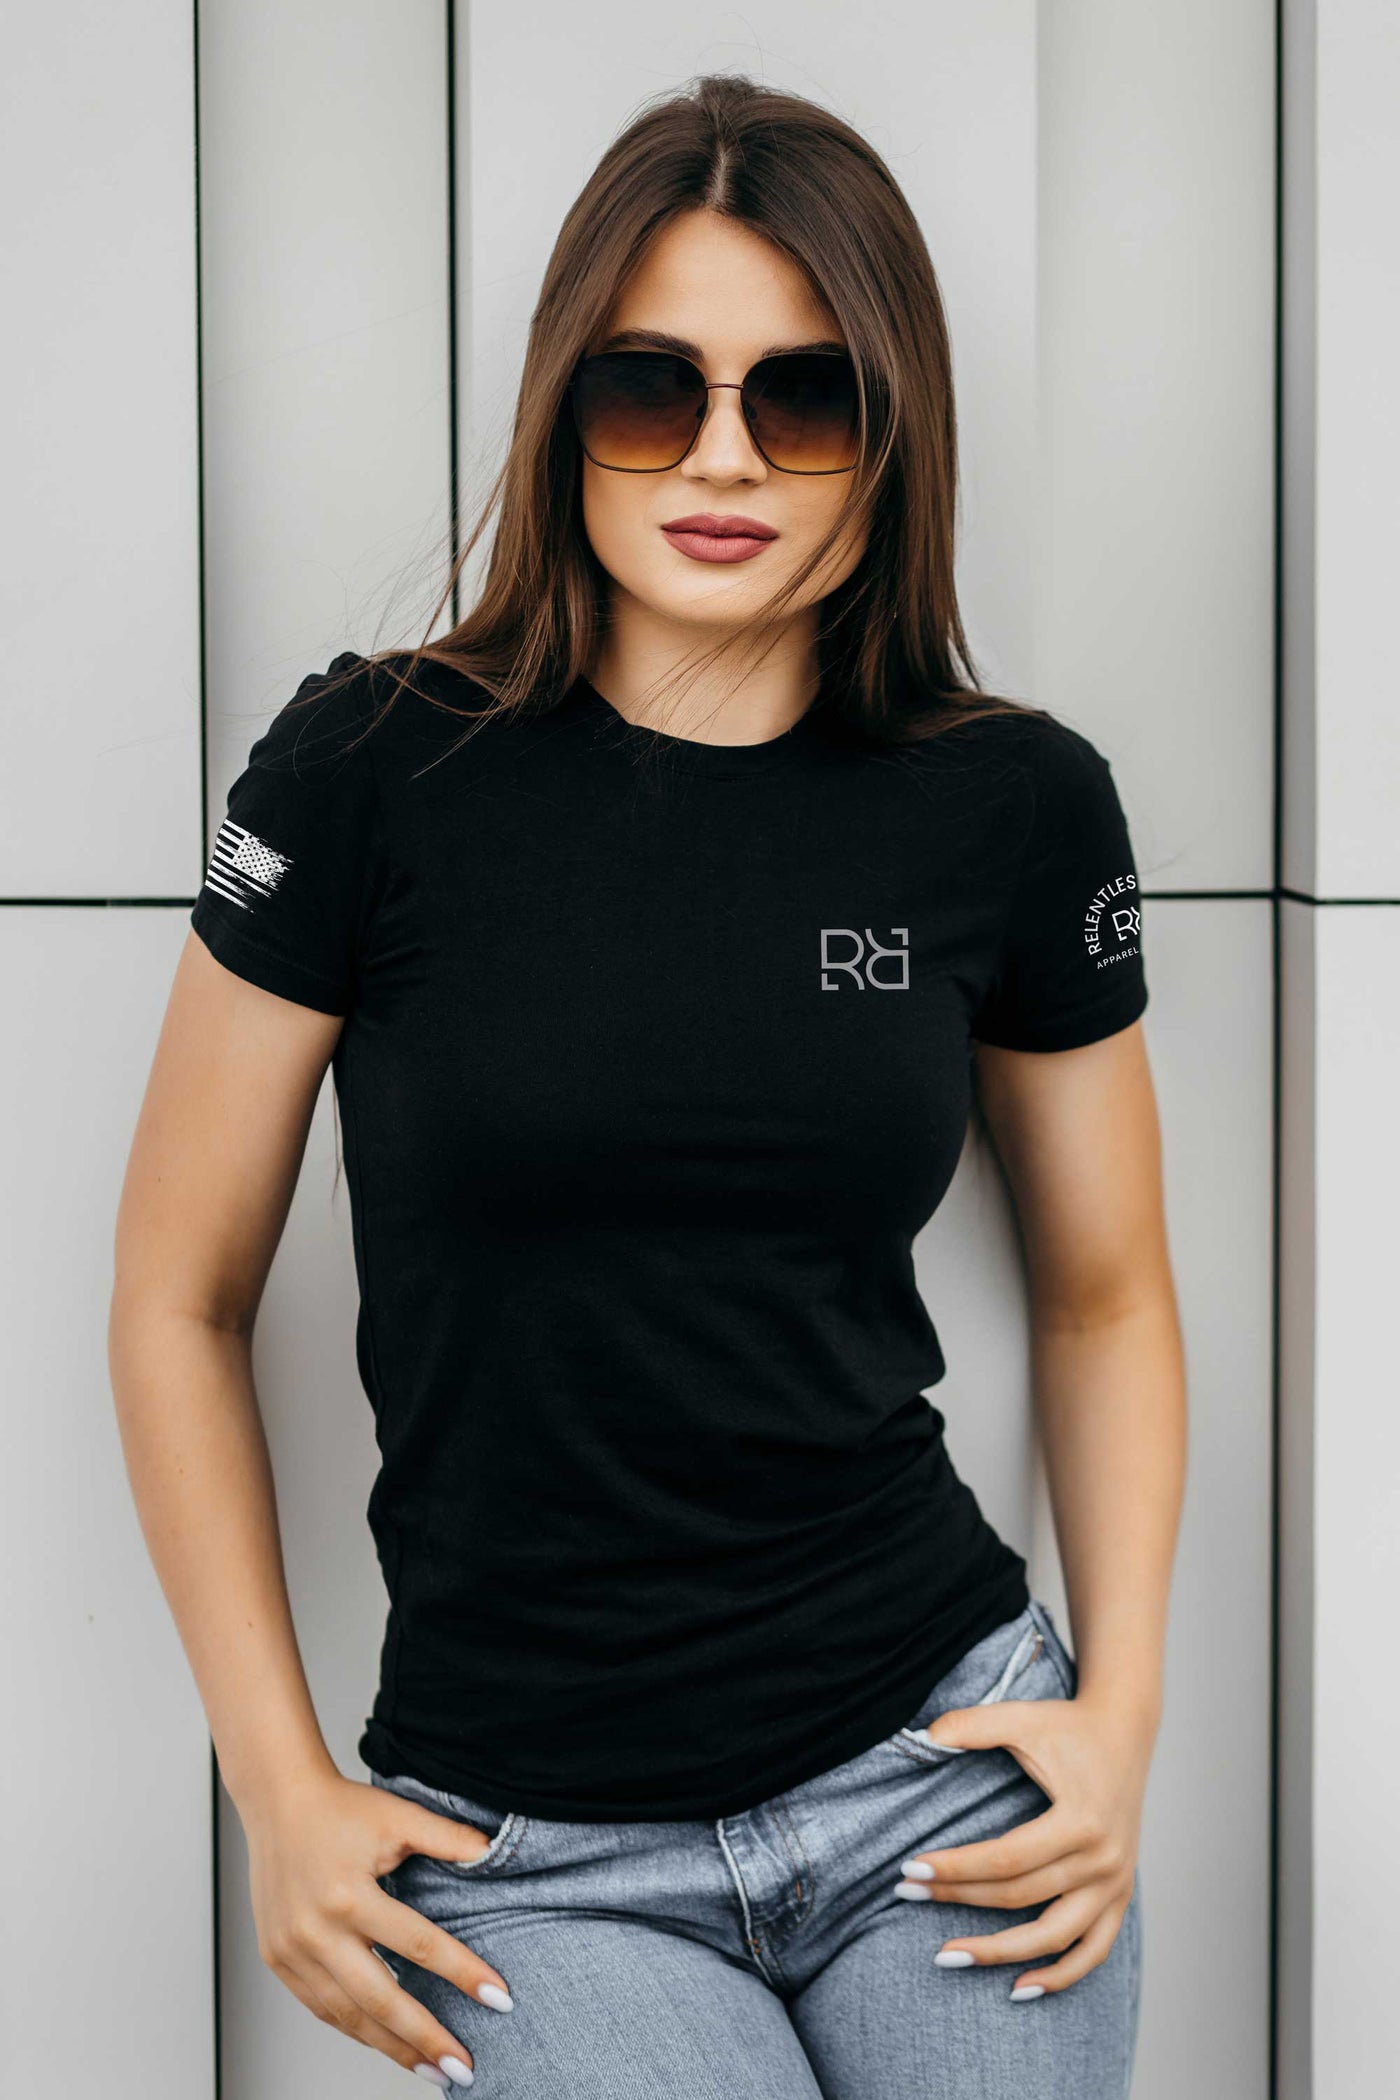 Woman wearing Solid Black Women's Rebel With A Purpose Back Design Tee